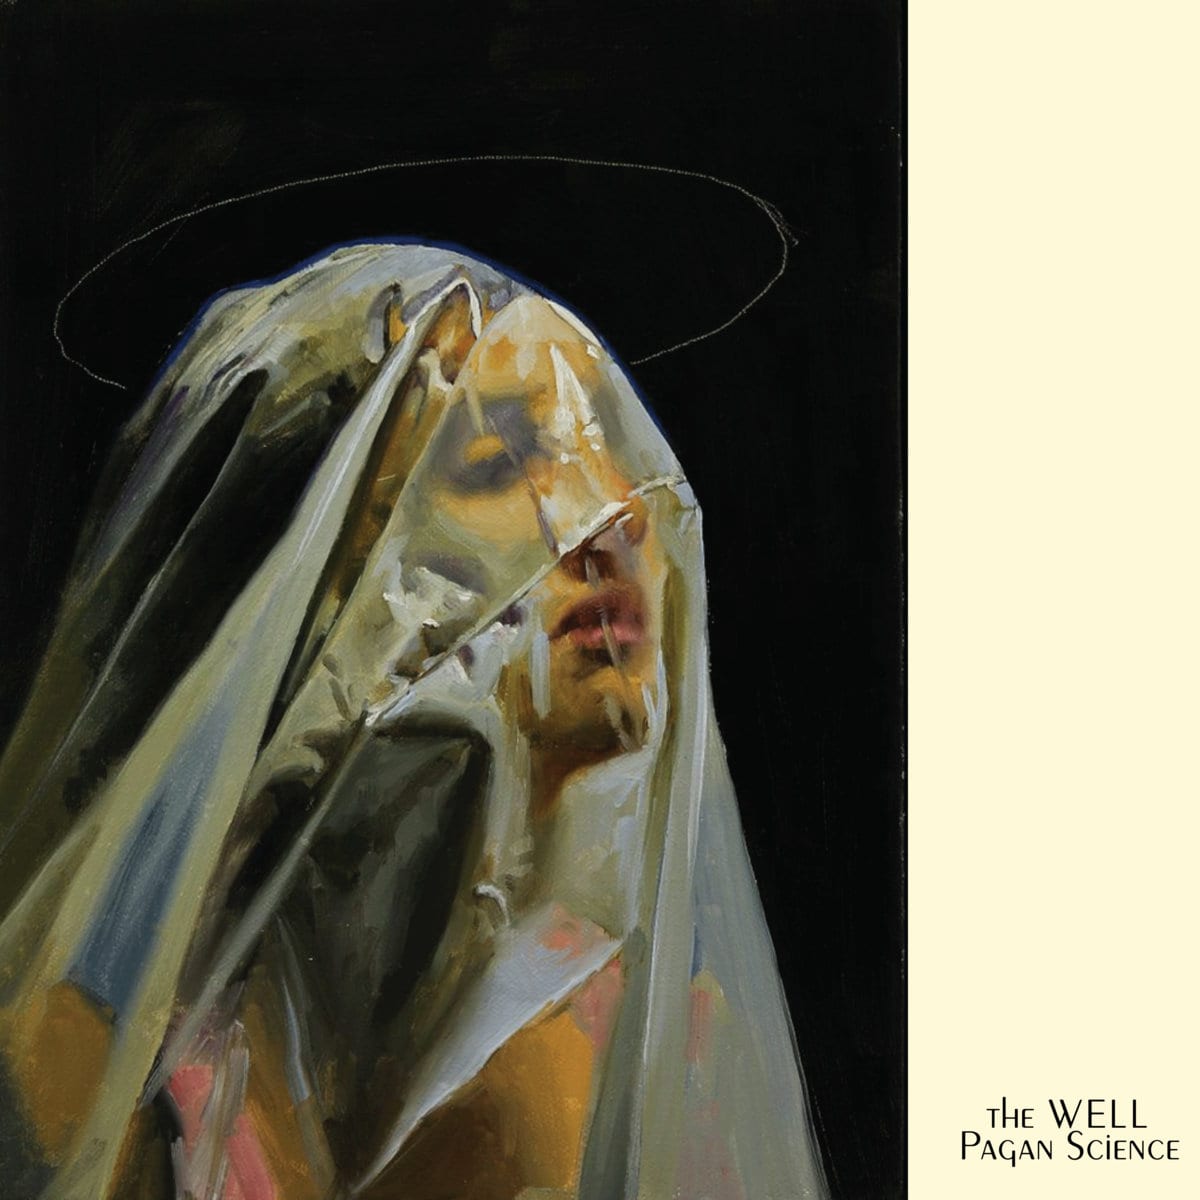 THE WELL – Pagan Science